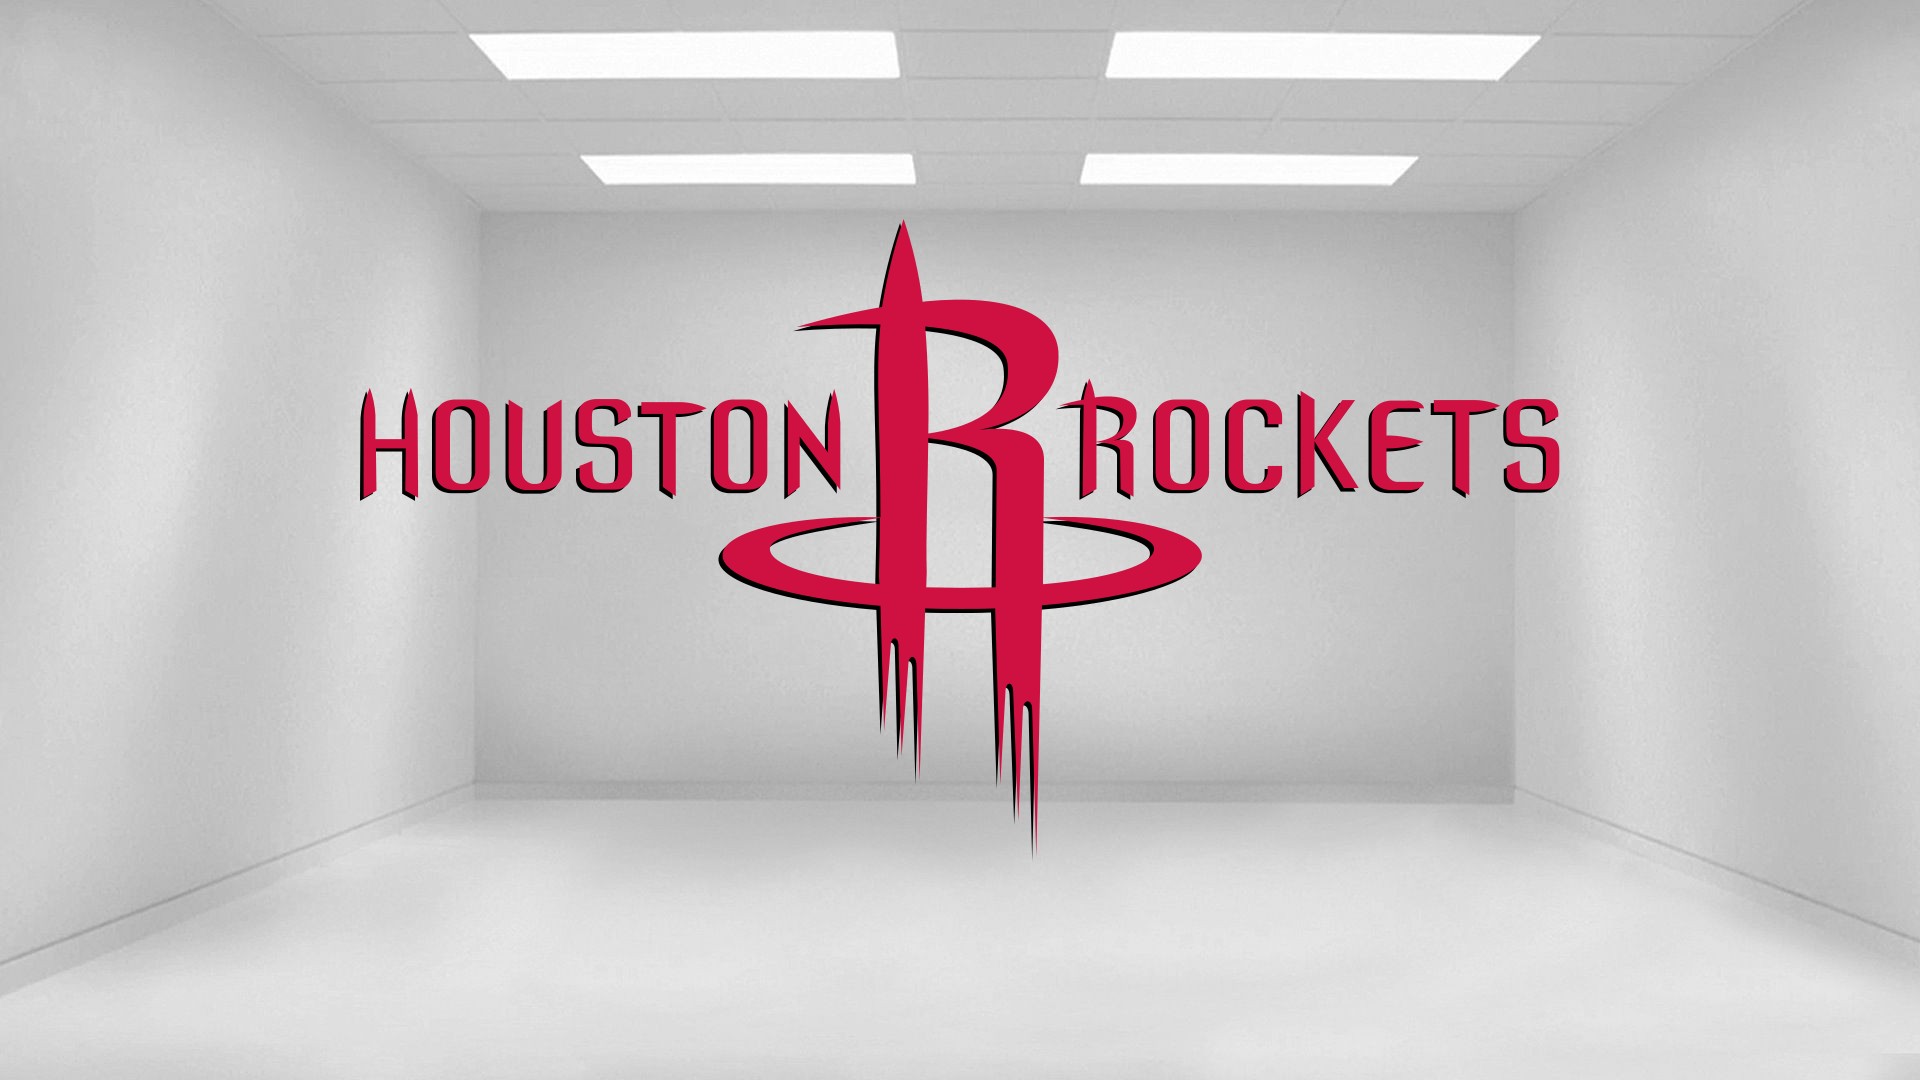 HD Desktop Wallpaper Houston Rockets with image dimensions 1920x1080 pixel. You can make this wallpaper for your Desktop Computer Backgrounds, Windows or Mac Screensavers, iPhone Lock screen, Tablet or Android and another Mobile Phone device